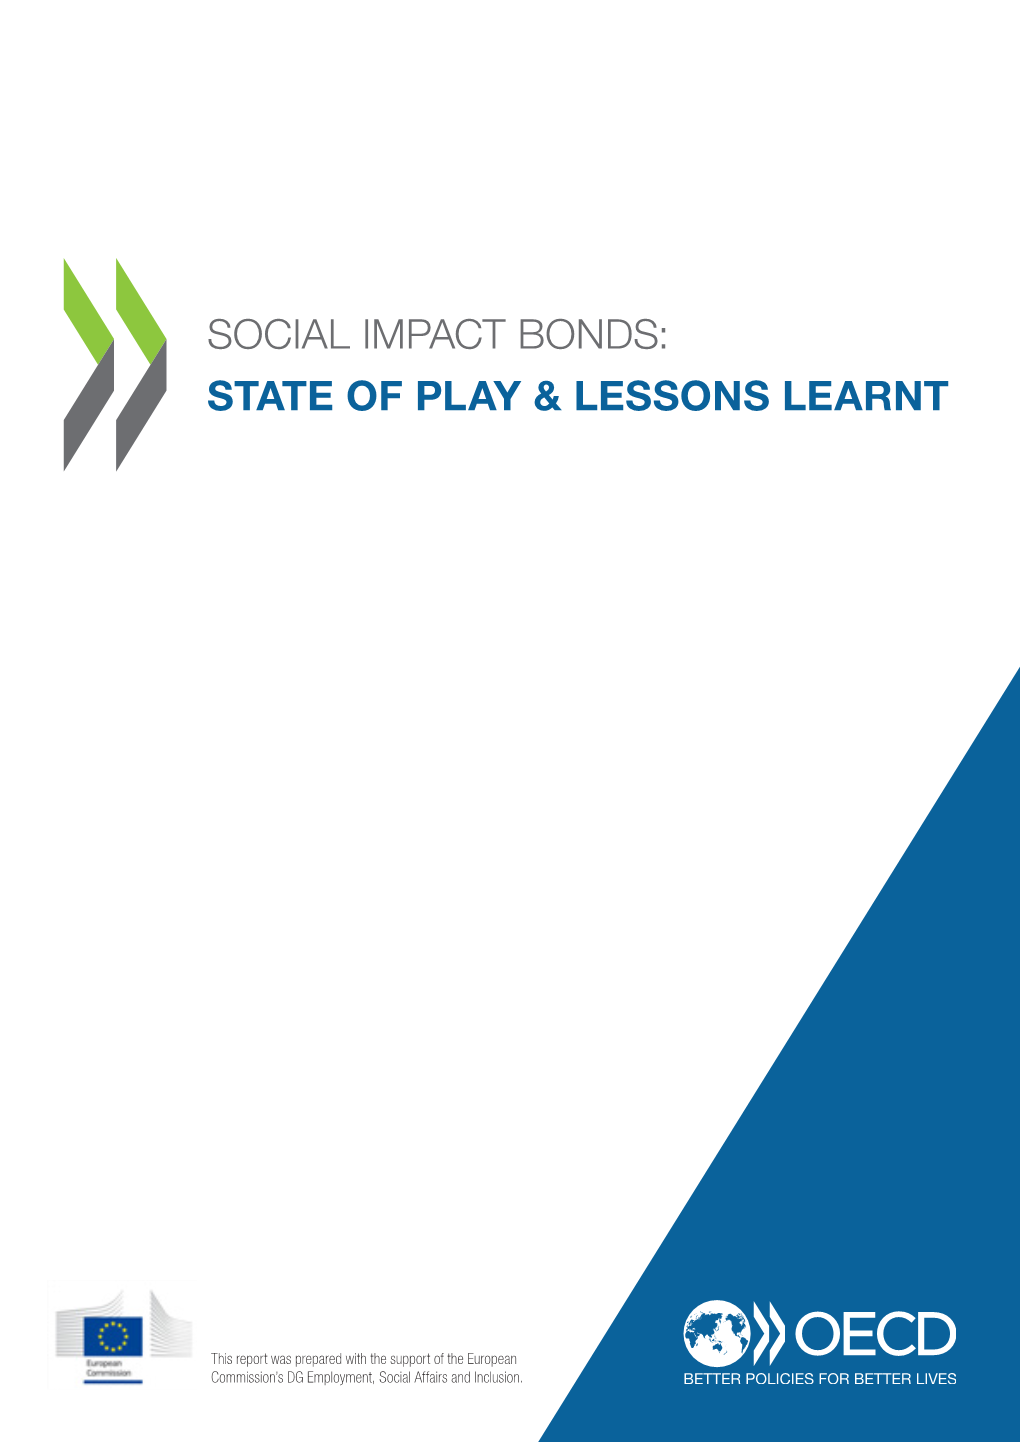 Social Impact Bonds: State of Play & Lessons Learnt